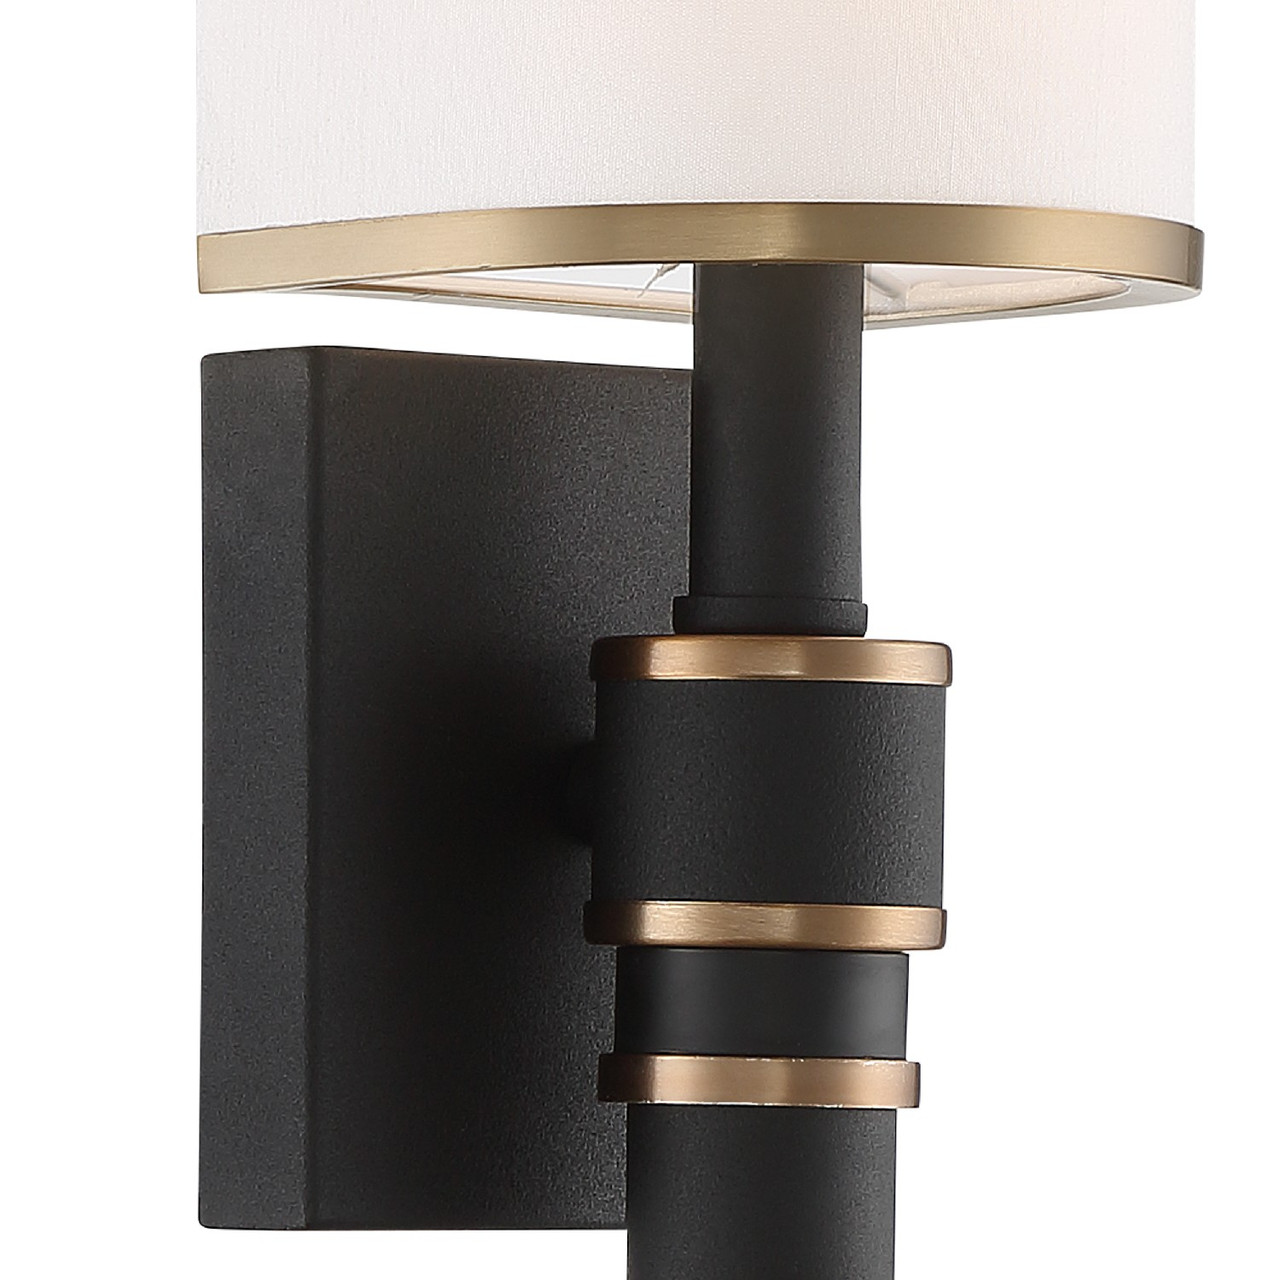 CRYSTORAMA SLO-A3601-VG-BF Sloane 1 Light Vibrant Gold + Black Forged Wall Sconce